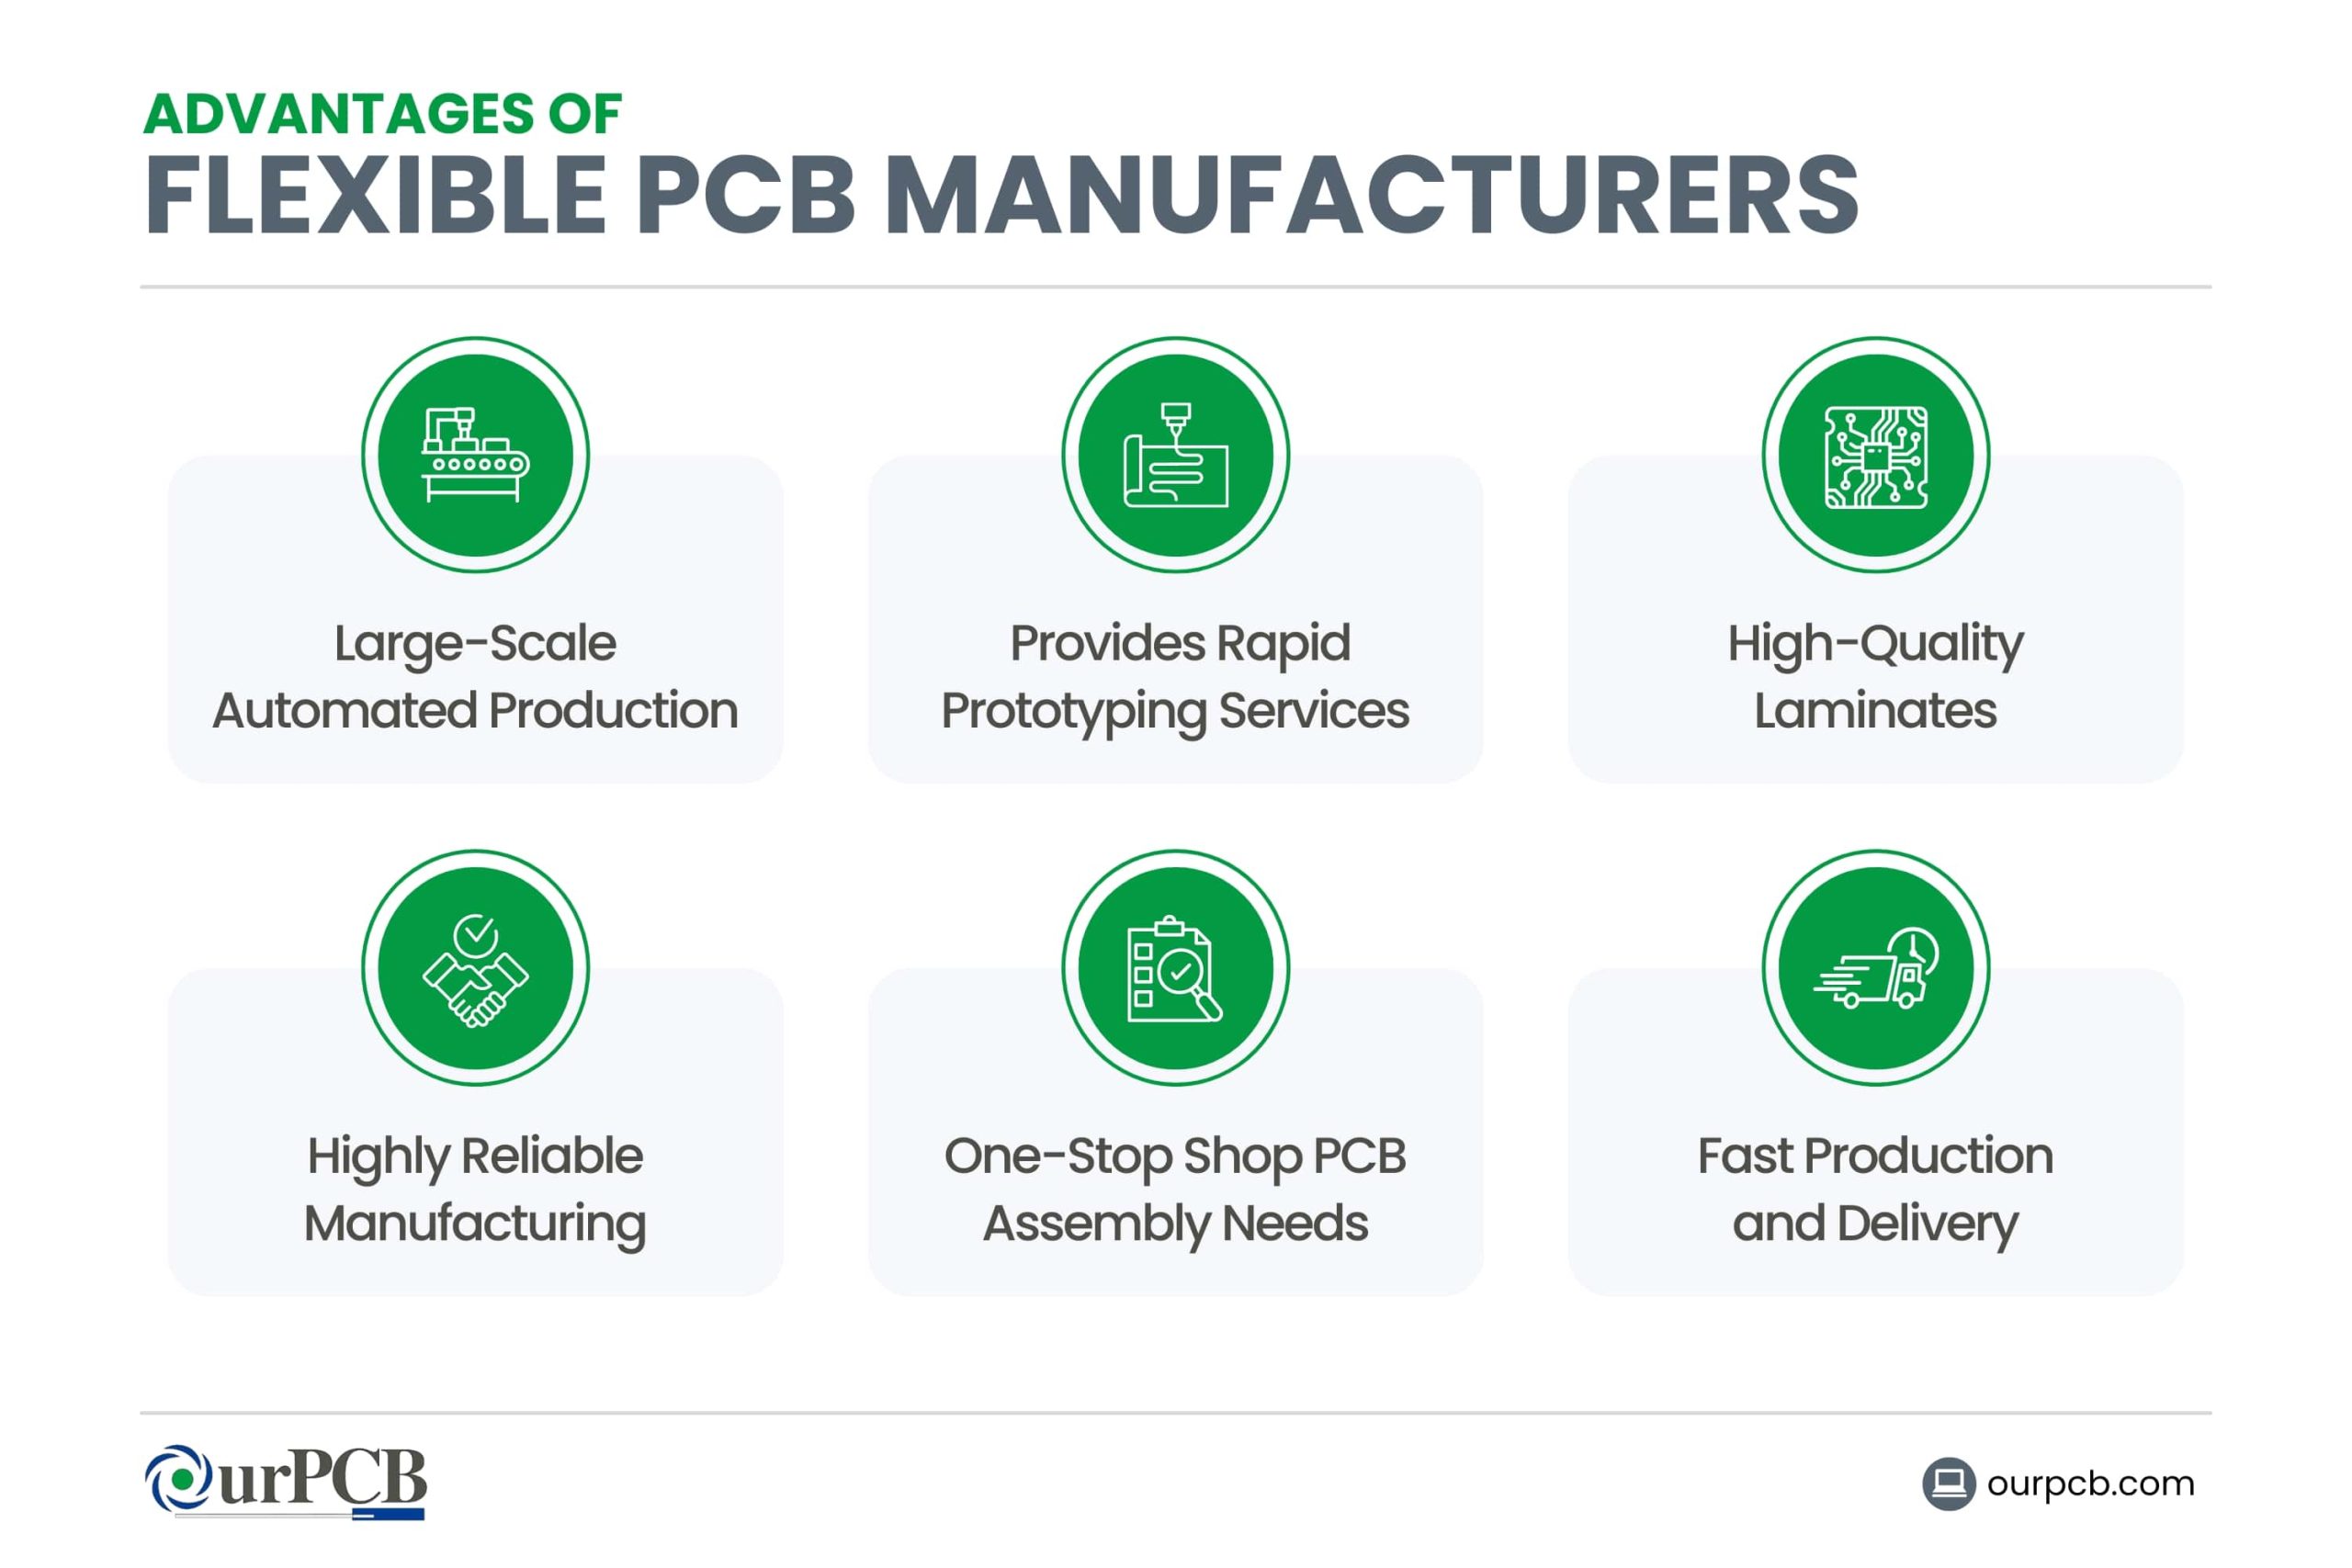 What are the Advantages of Flexible PCB Manufacturers